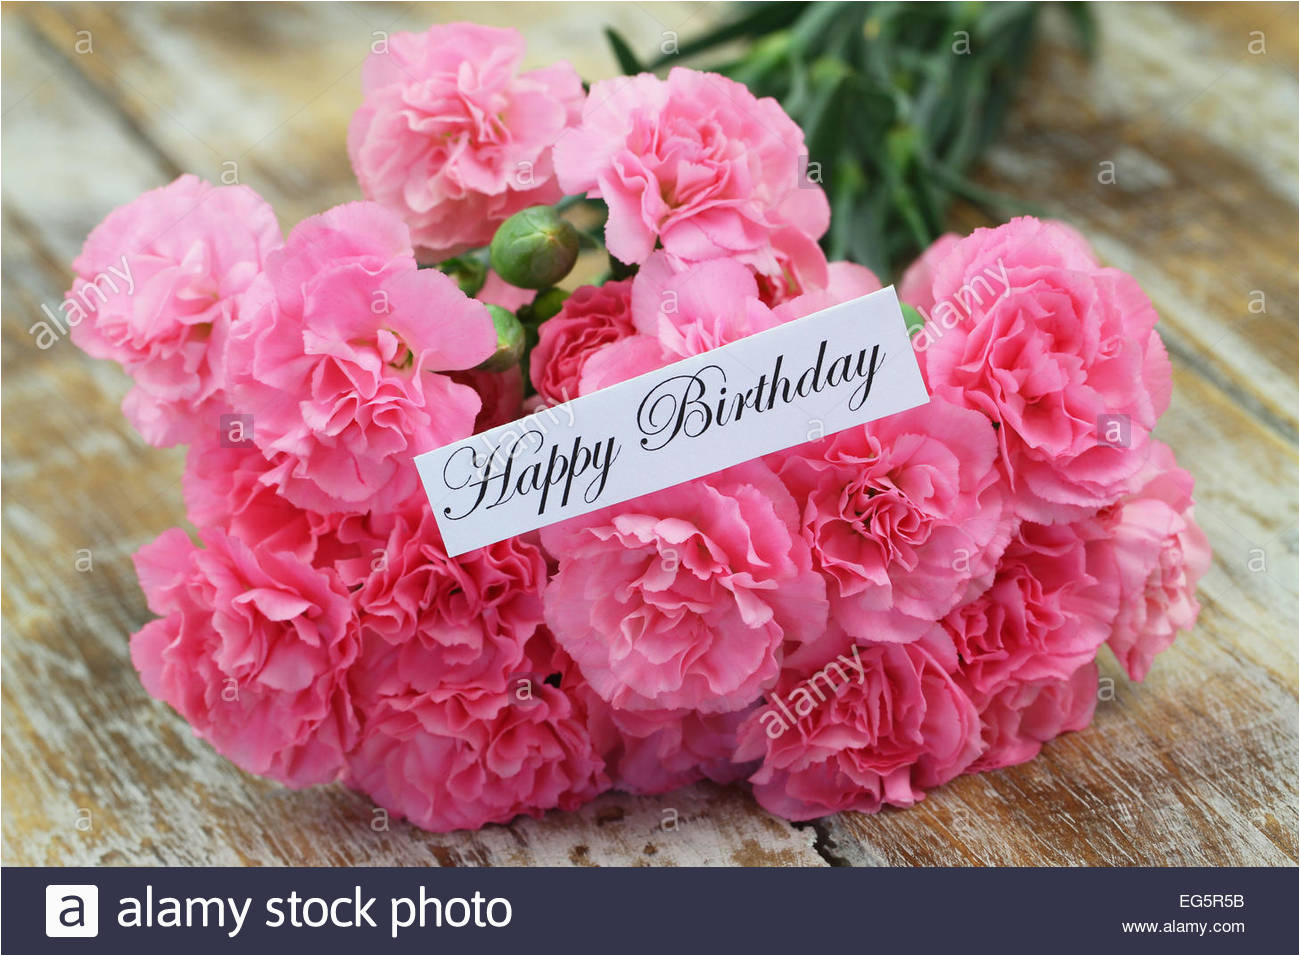 happy birthday card with pink carnation flowers stock